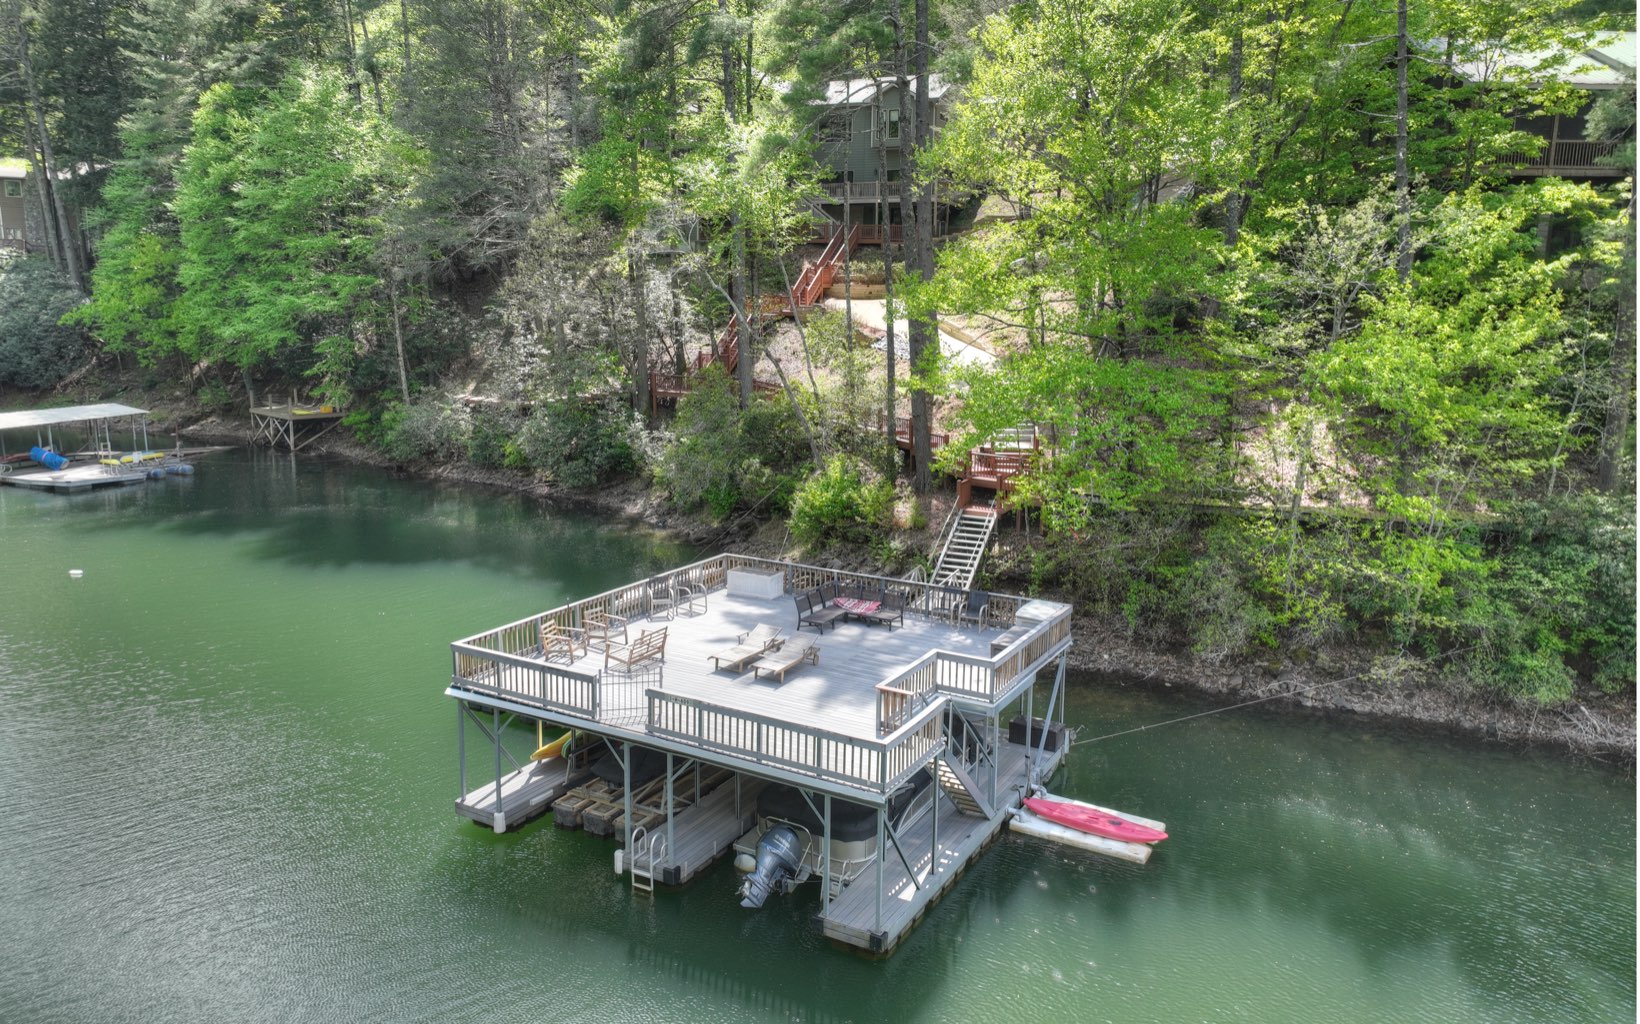 Incredible Lake Blue Ridge home w/ year round deep water, private cove, waterfall views, paved access, only 10 minutes from Blue Ridge! 4 bed/3.5 baths, 3 living areas, huge kitchen & amazing outdoor living space to take in the views of the lake & the sounds of the waterfall. Large double decker, 2 slip dock w/ 177' of lake frontage. Private concrete path or steps through the towering hemlocks & mtn laurel to the lake. Upscale primary suite w/ spacious sitting area, fireplace, lake views, HUGE closet, laundry, & spa like bathroom. Kitchen offers a walk in pantry, island, dining area all open to the expansive great room w/ soaring ceilings, oversized stone fireplace & large windows overlooking the lake. Terrace level offers 2 more gathering areas, a bunk room, 2beds/2baths, an office & 2nd laundry. 2 garages (a 2 car & the other a 3 car), & long private driveway. Located in the Aska Adventure Area!